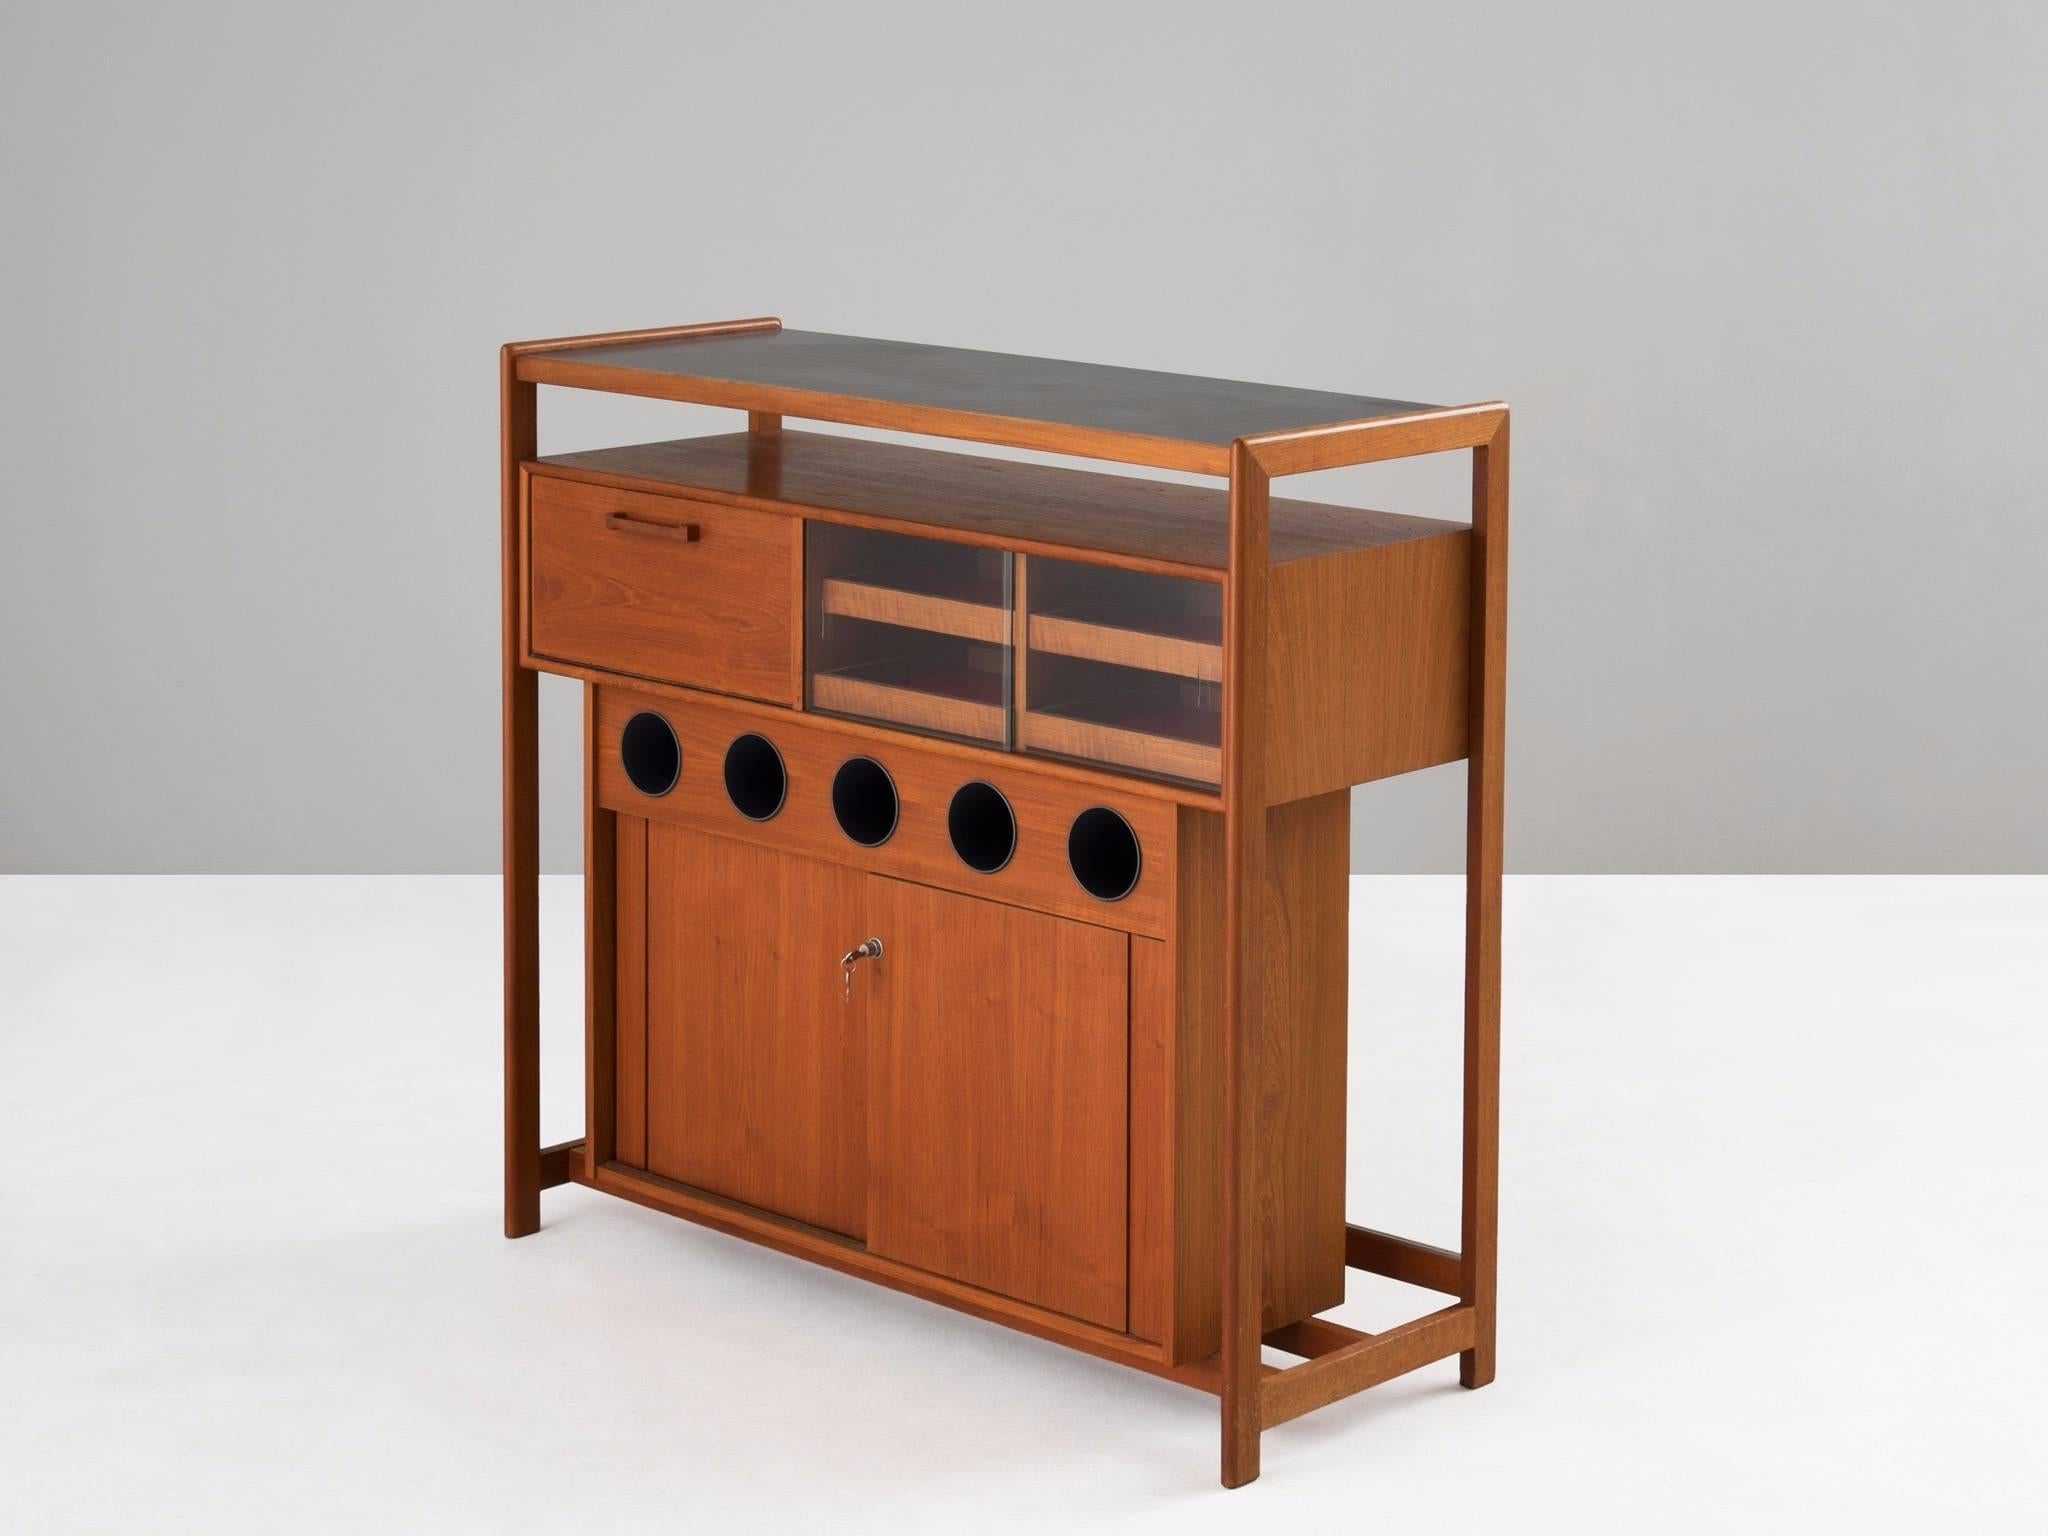 Bar, in teak, glass and wood, Denmark, 1960s.

Refined dry bar in teak. This bar is well designed with clever storage facilities. The design is simplistic. The several storage compartments are placed in a wooden frame, this gives the design an